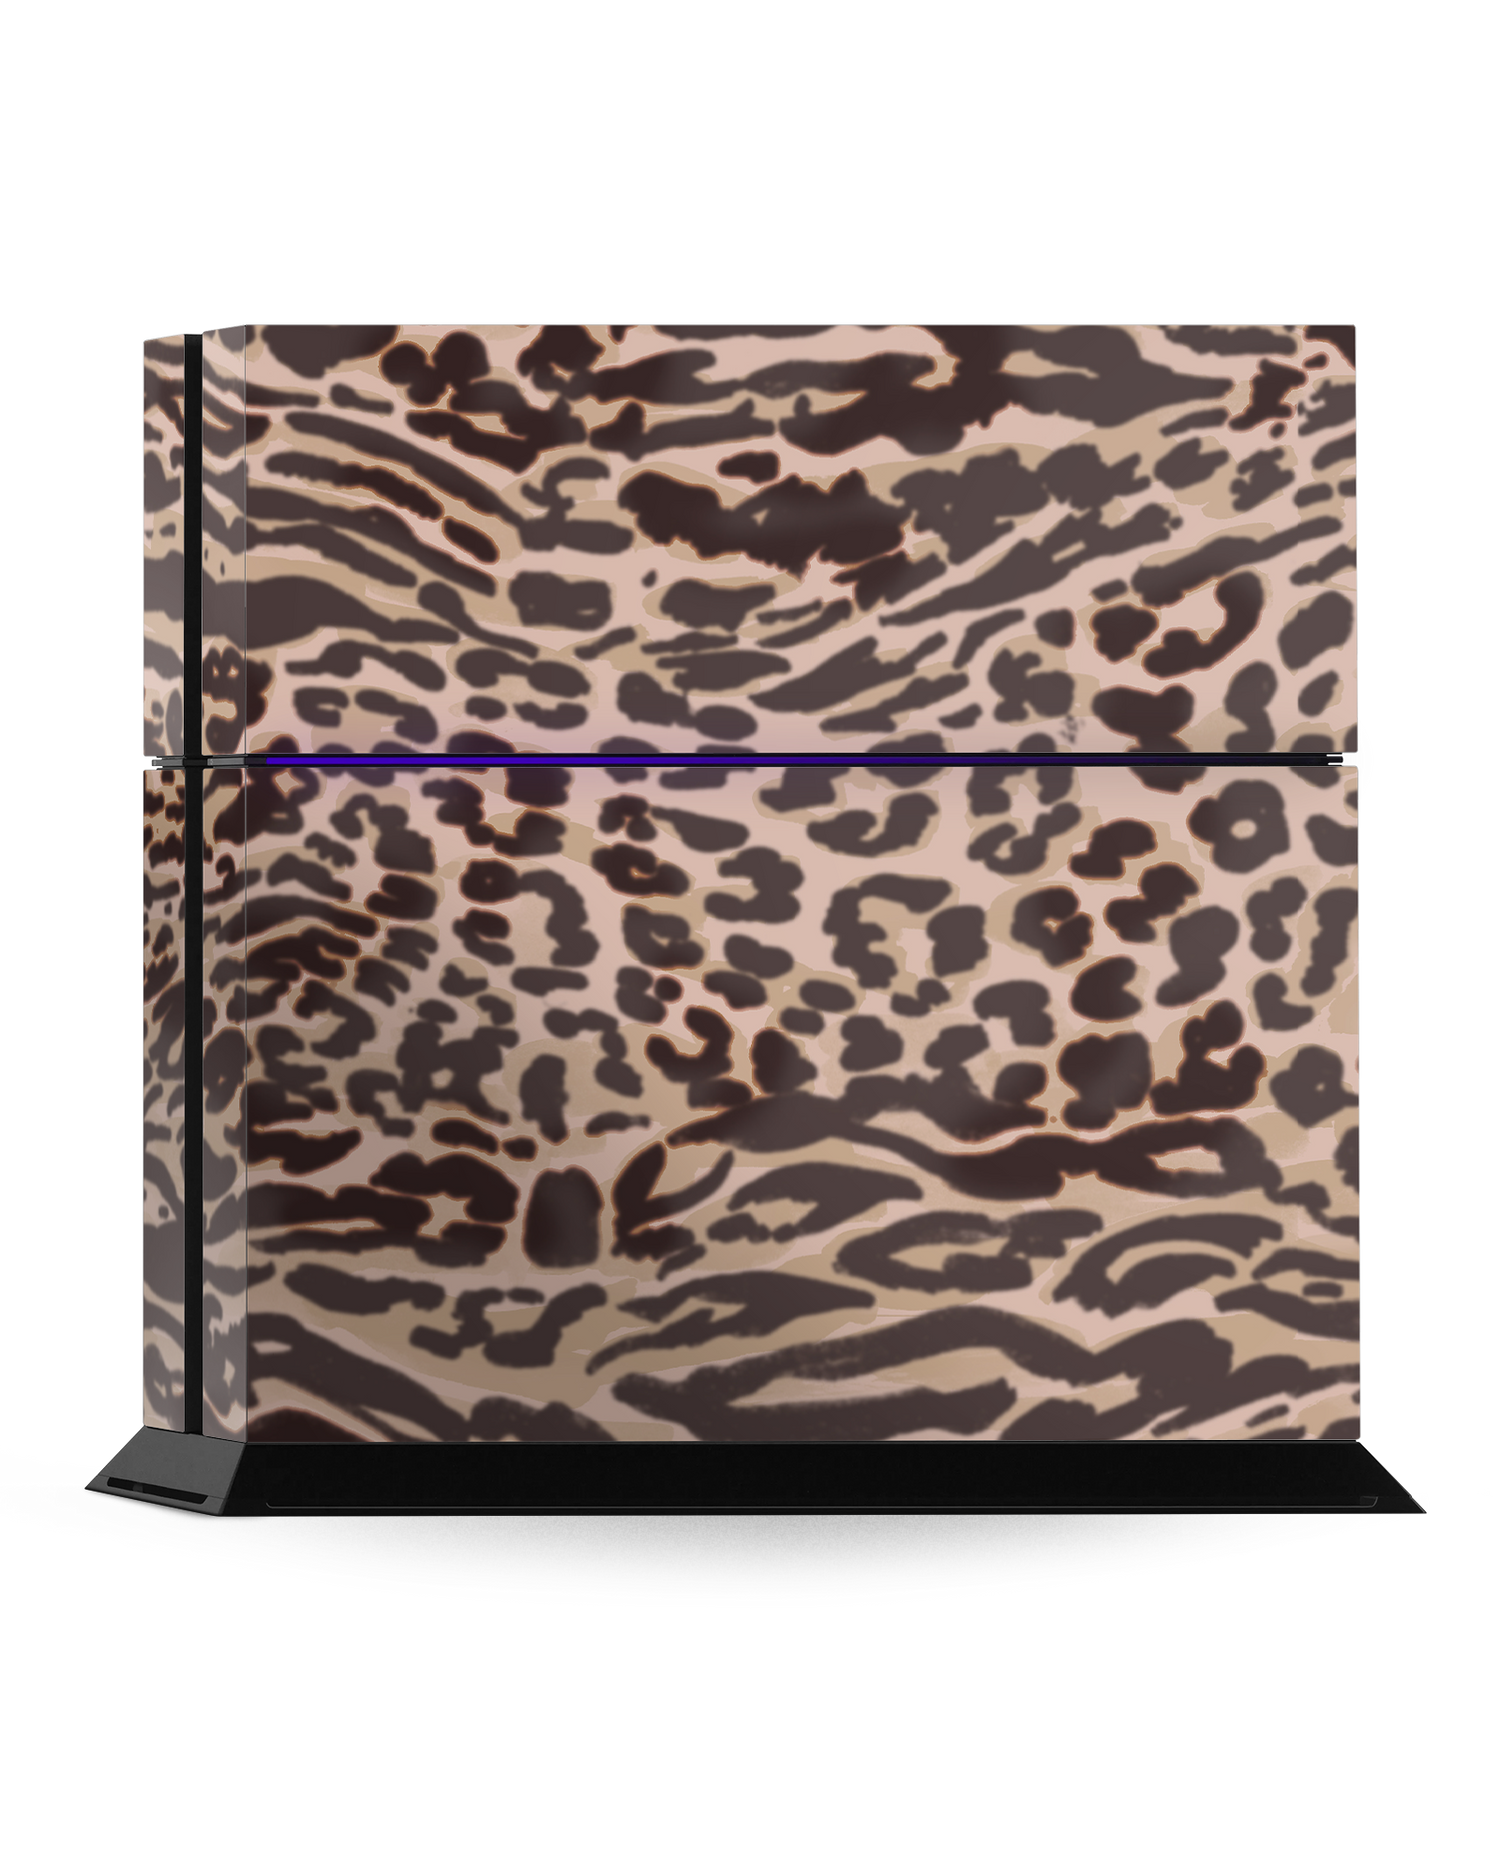 Animal Skin Tough Love Console Skin for Sony PlayStation 4: Standing